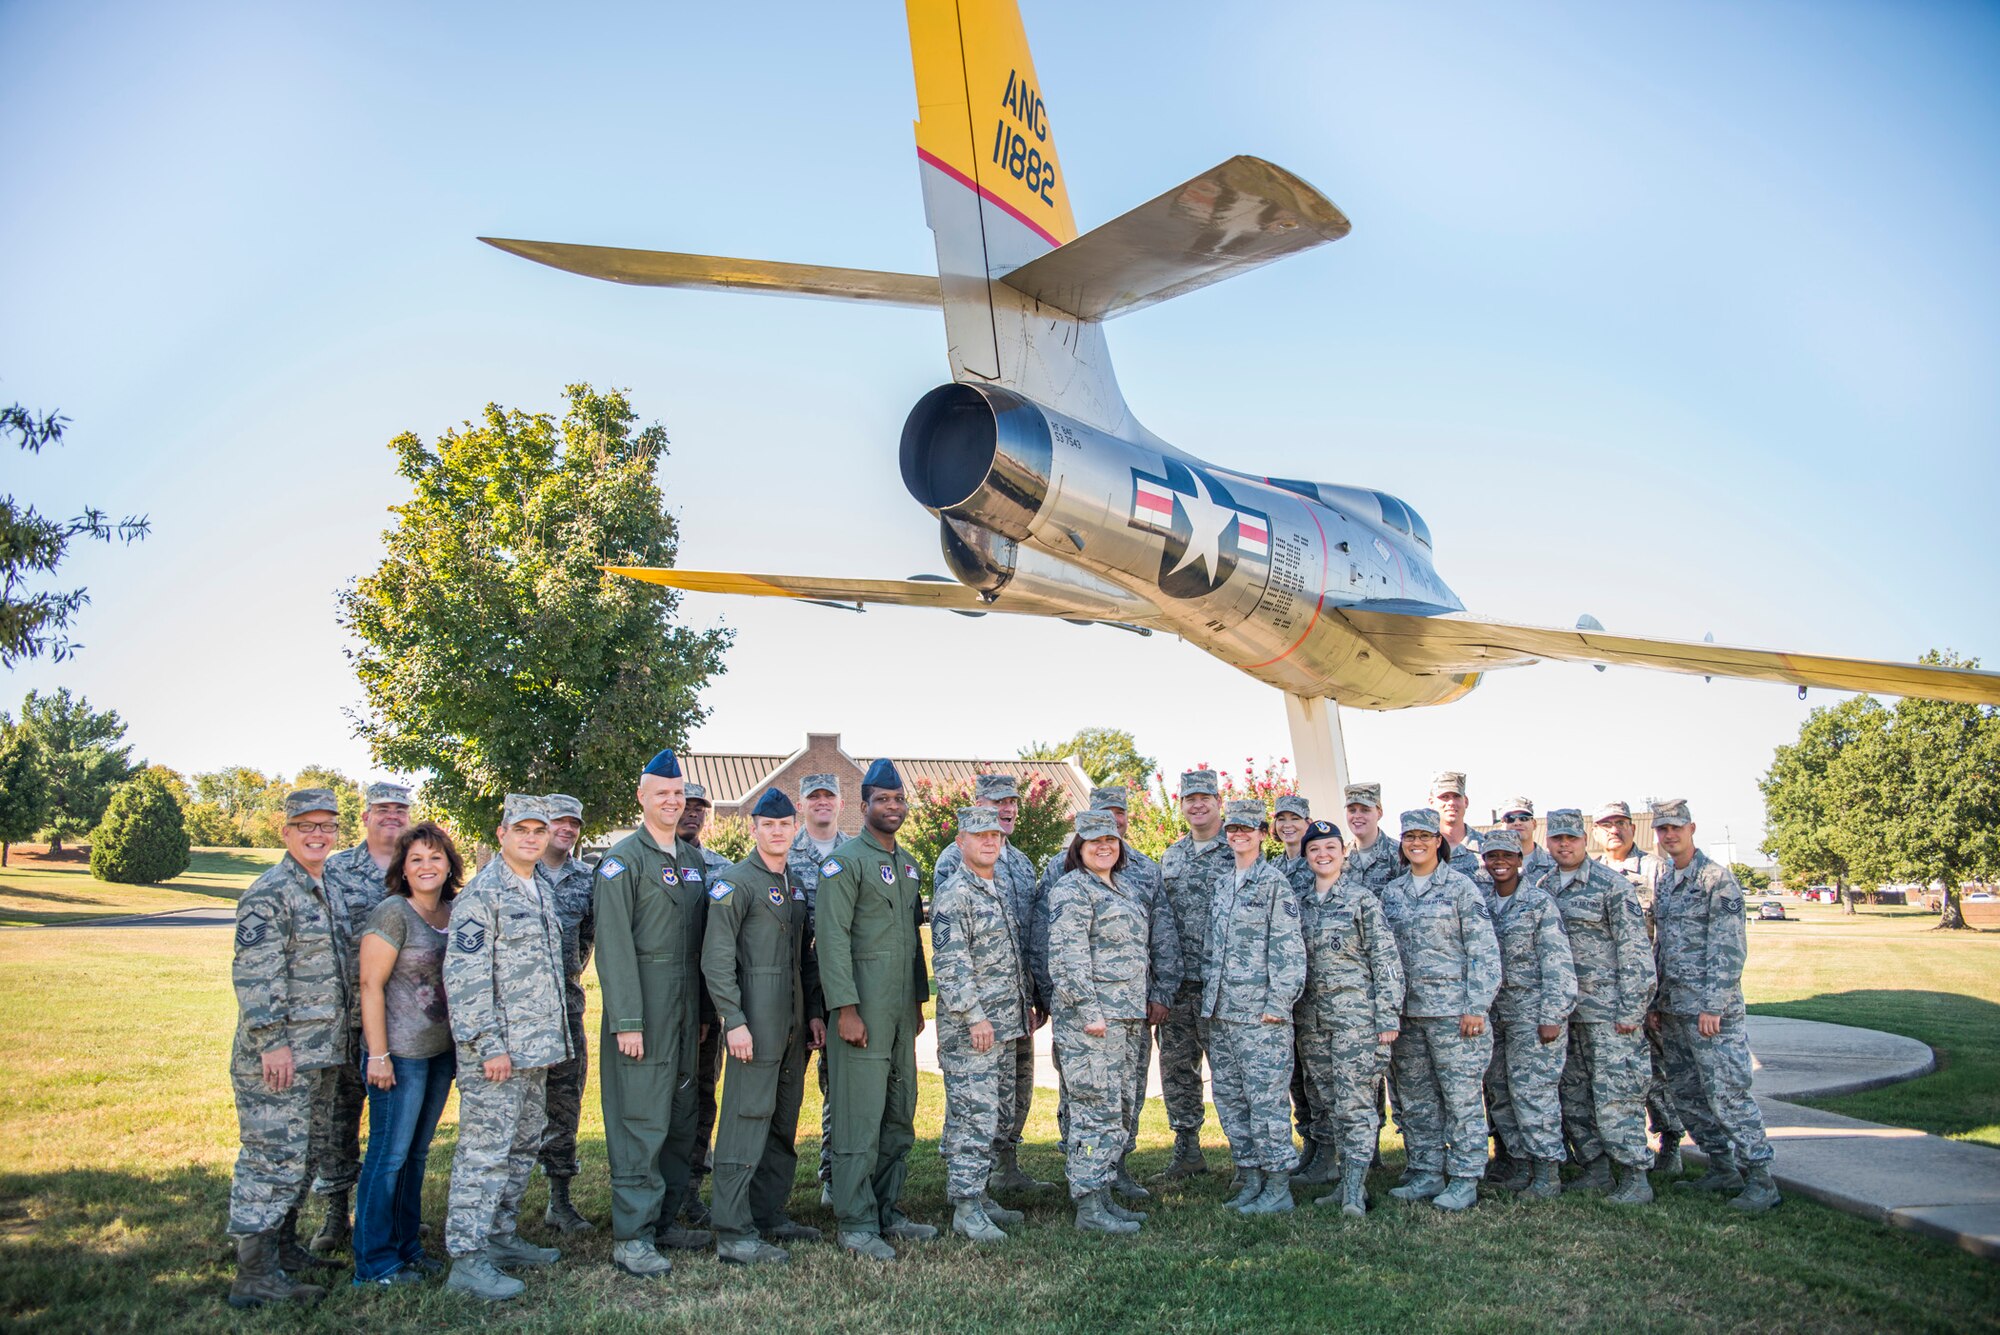 LITTLE ROCK AIR FORCE BASE, Ark. - Instructors and students take a group photo  Sept. 24, 2014 here during an Instructor Certification Program course. Instructors Tammie Smeltzer, Master Sgt. Bill Conner and Master Sgt. Clifton Boswell traveled from the I.G. Brown Training and Education Center, McGhee Tyson Air National Guard Base in Tennessee to teach the two-week course, which is a requirement prior to teaching satellite education or professional military education. (U.S. Air National Guard photo by Senior Airman Ian Caple/Released)